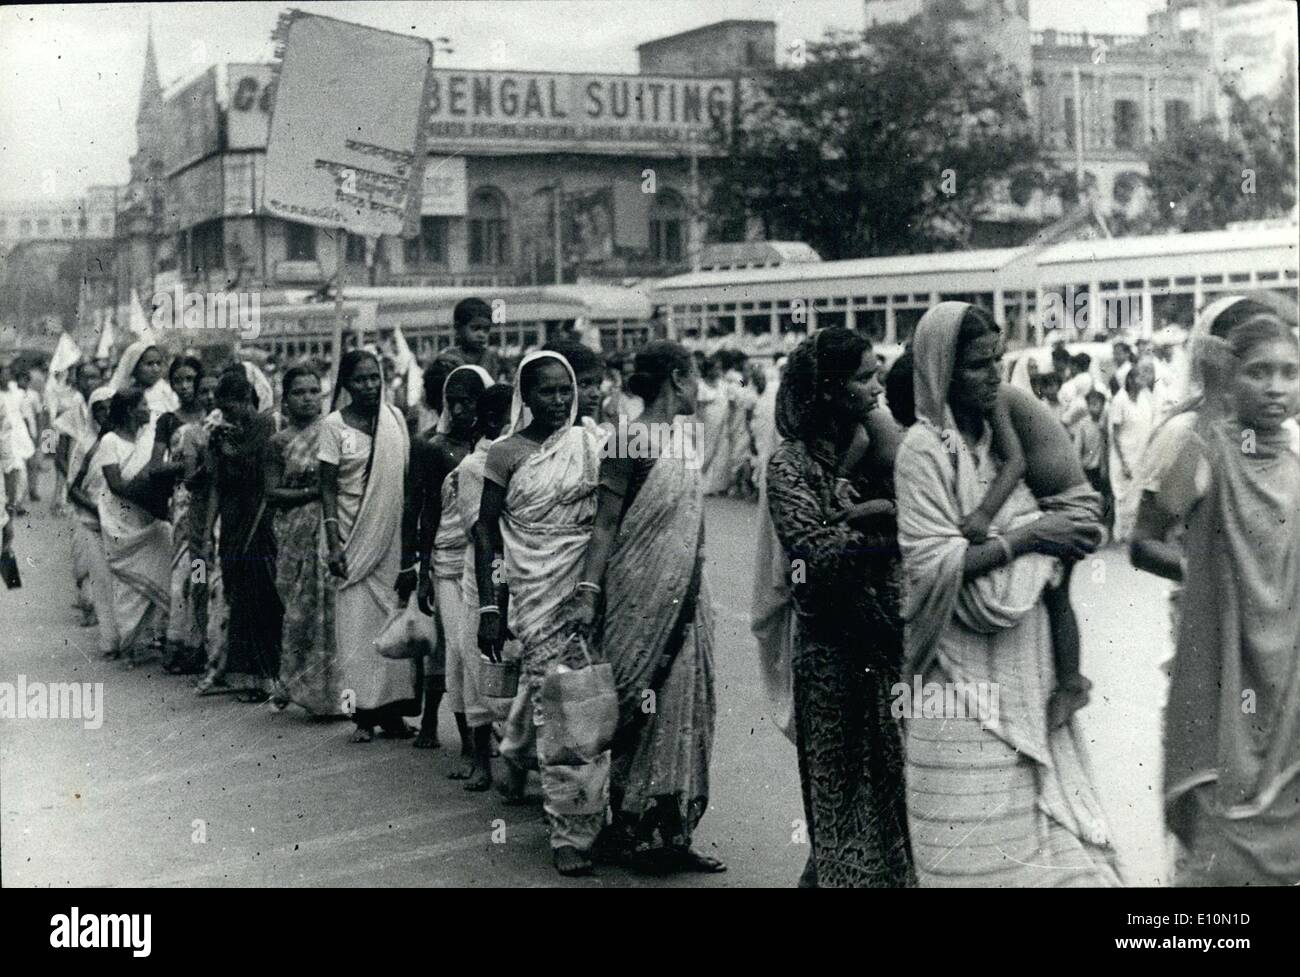 Aug. 08, 1973 - Members of Gantatric Mahila Samity held a demonstration at Esplanade East in Calcutta on Monday to protest against rish in prices. Photo shows as they march in procession, some of them carrying their children with them. Stock Photo